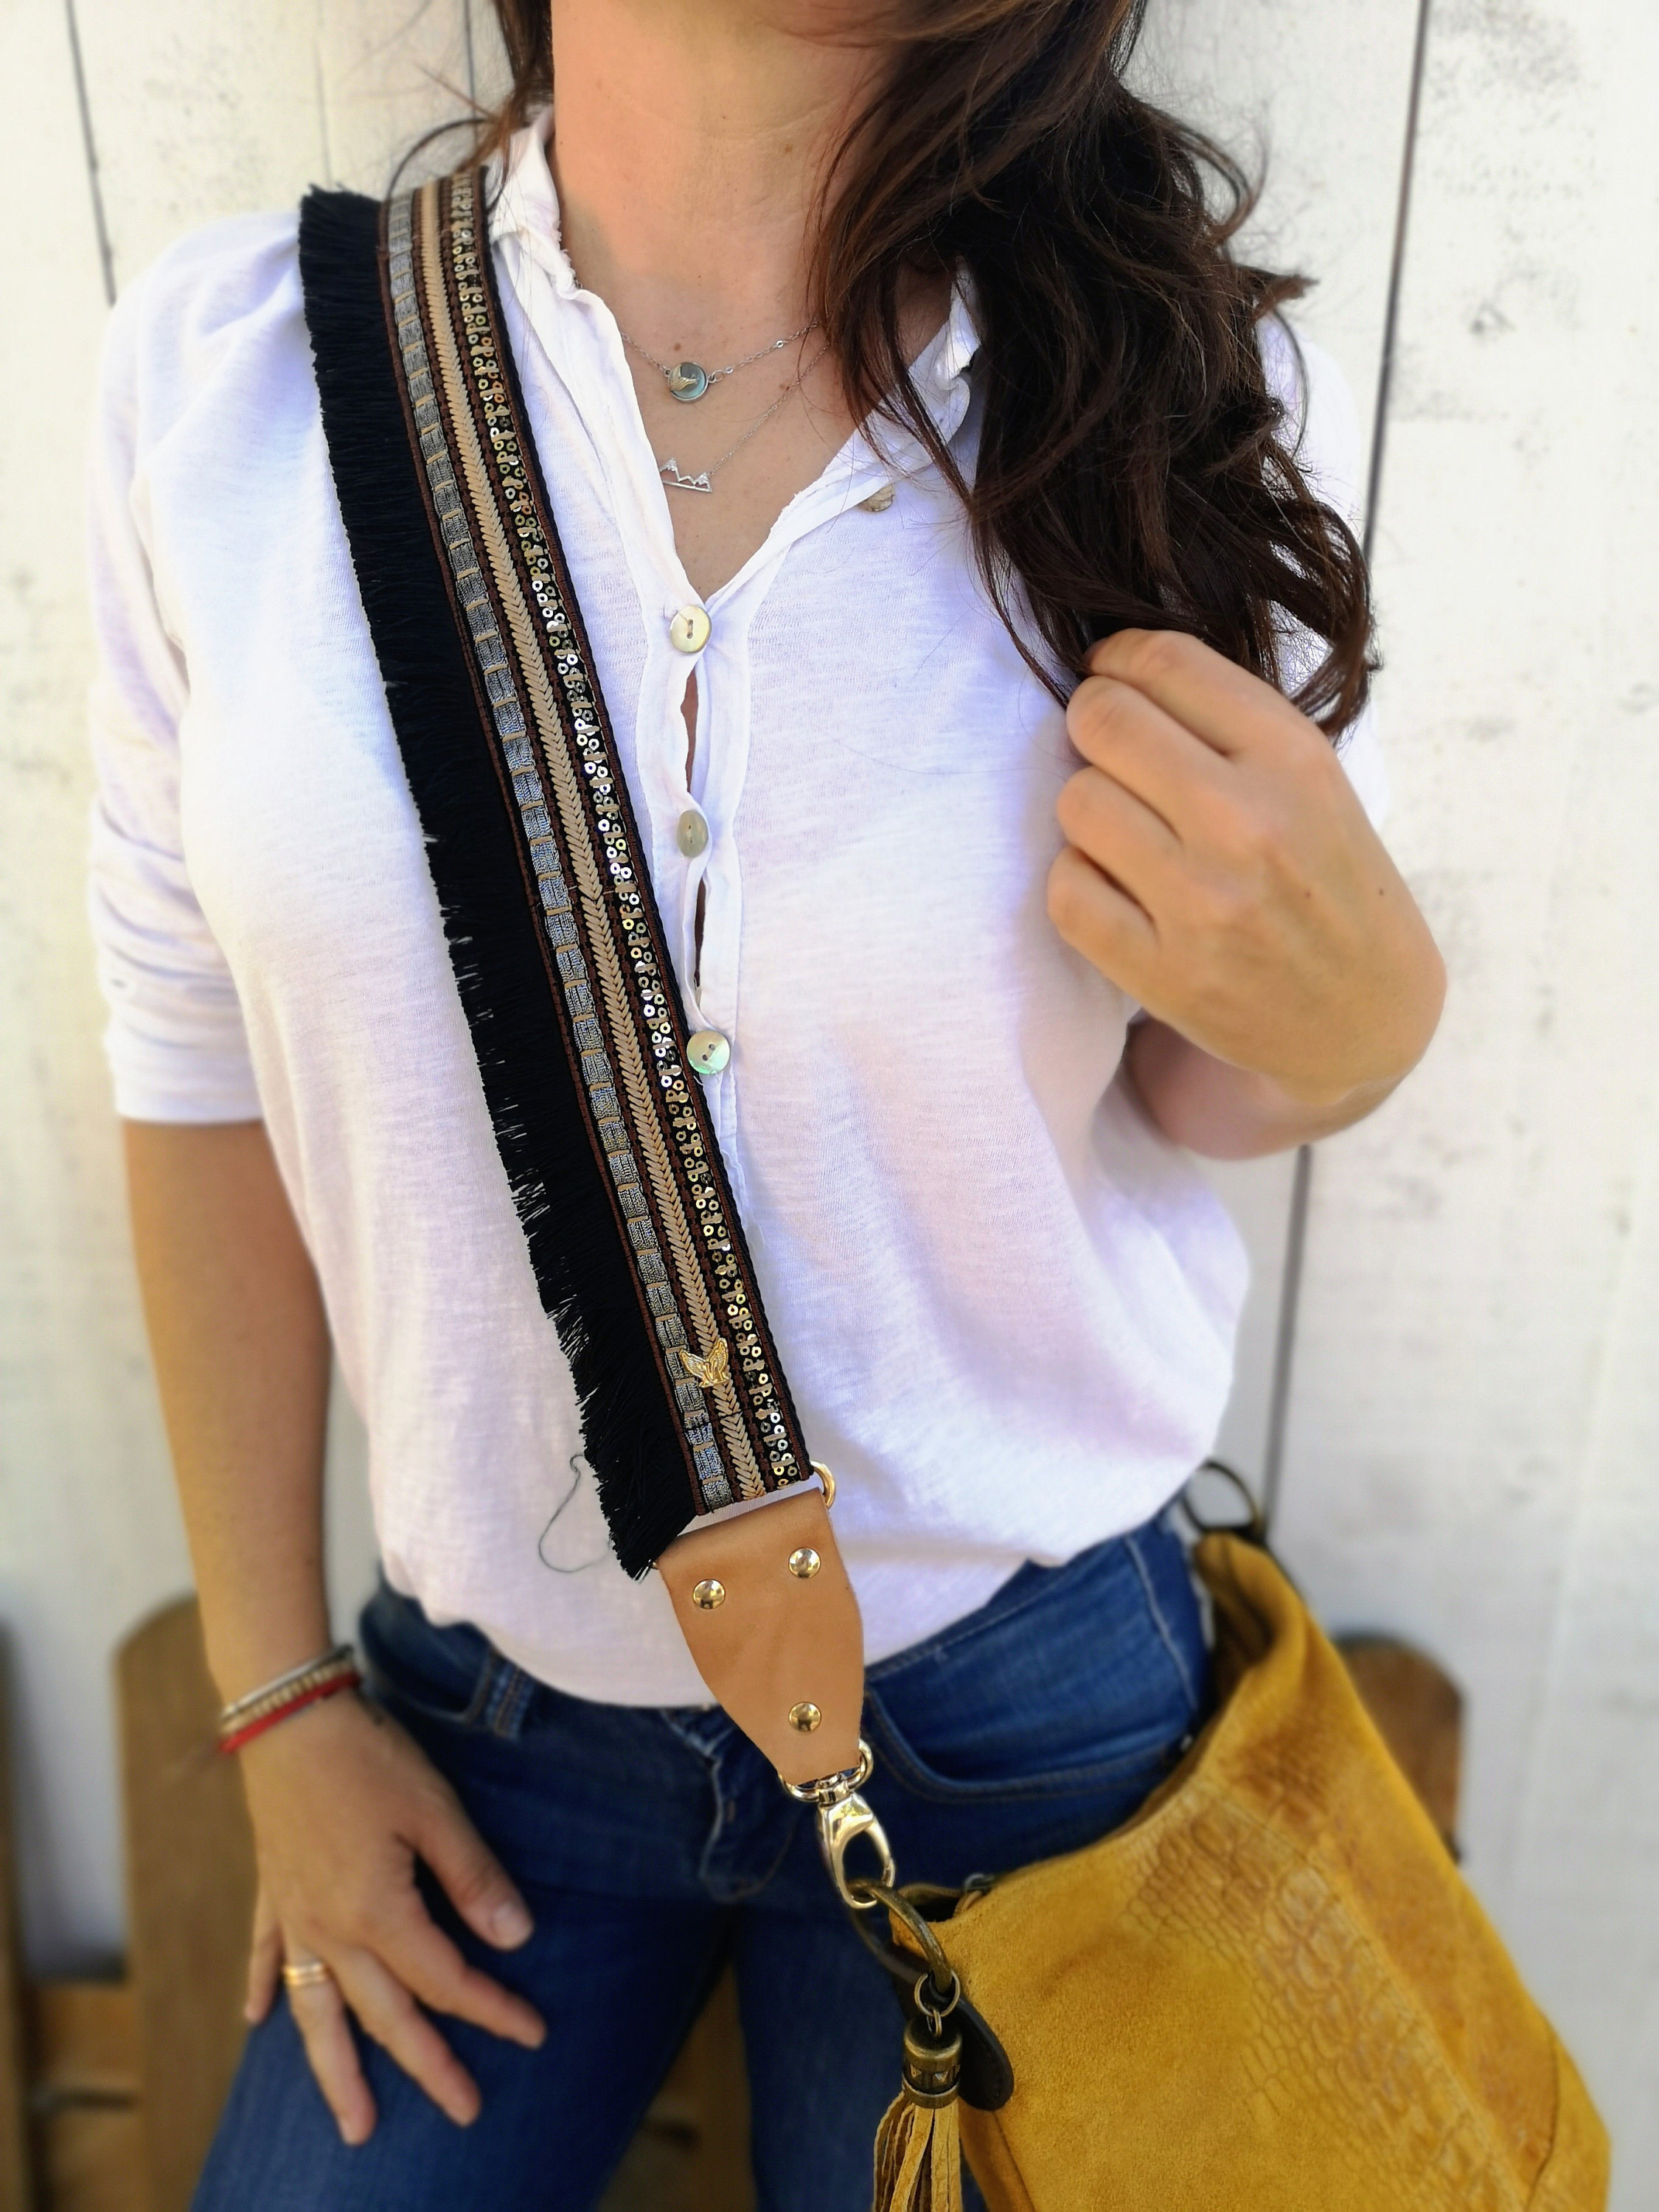 Bag and Guitar Strap With Sequin Details. Handbag Strap, Crossbody Bag,  Shoulder Strap With Handbag, Crossbody Purse. -  Israel